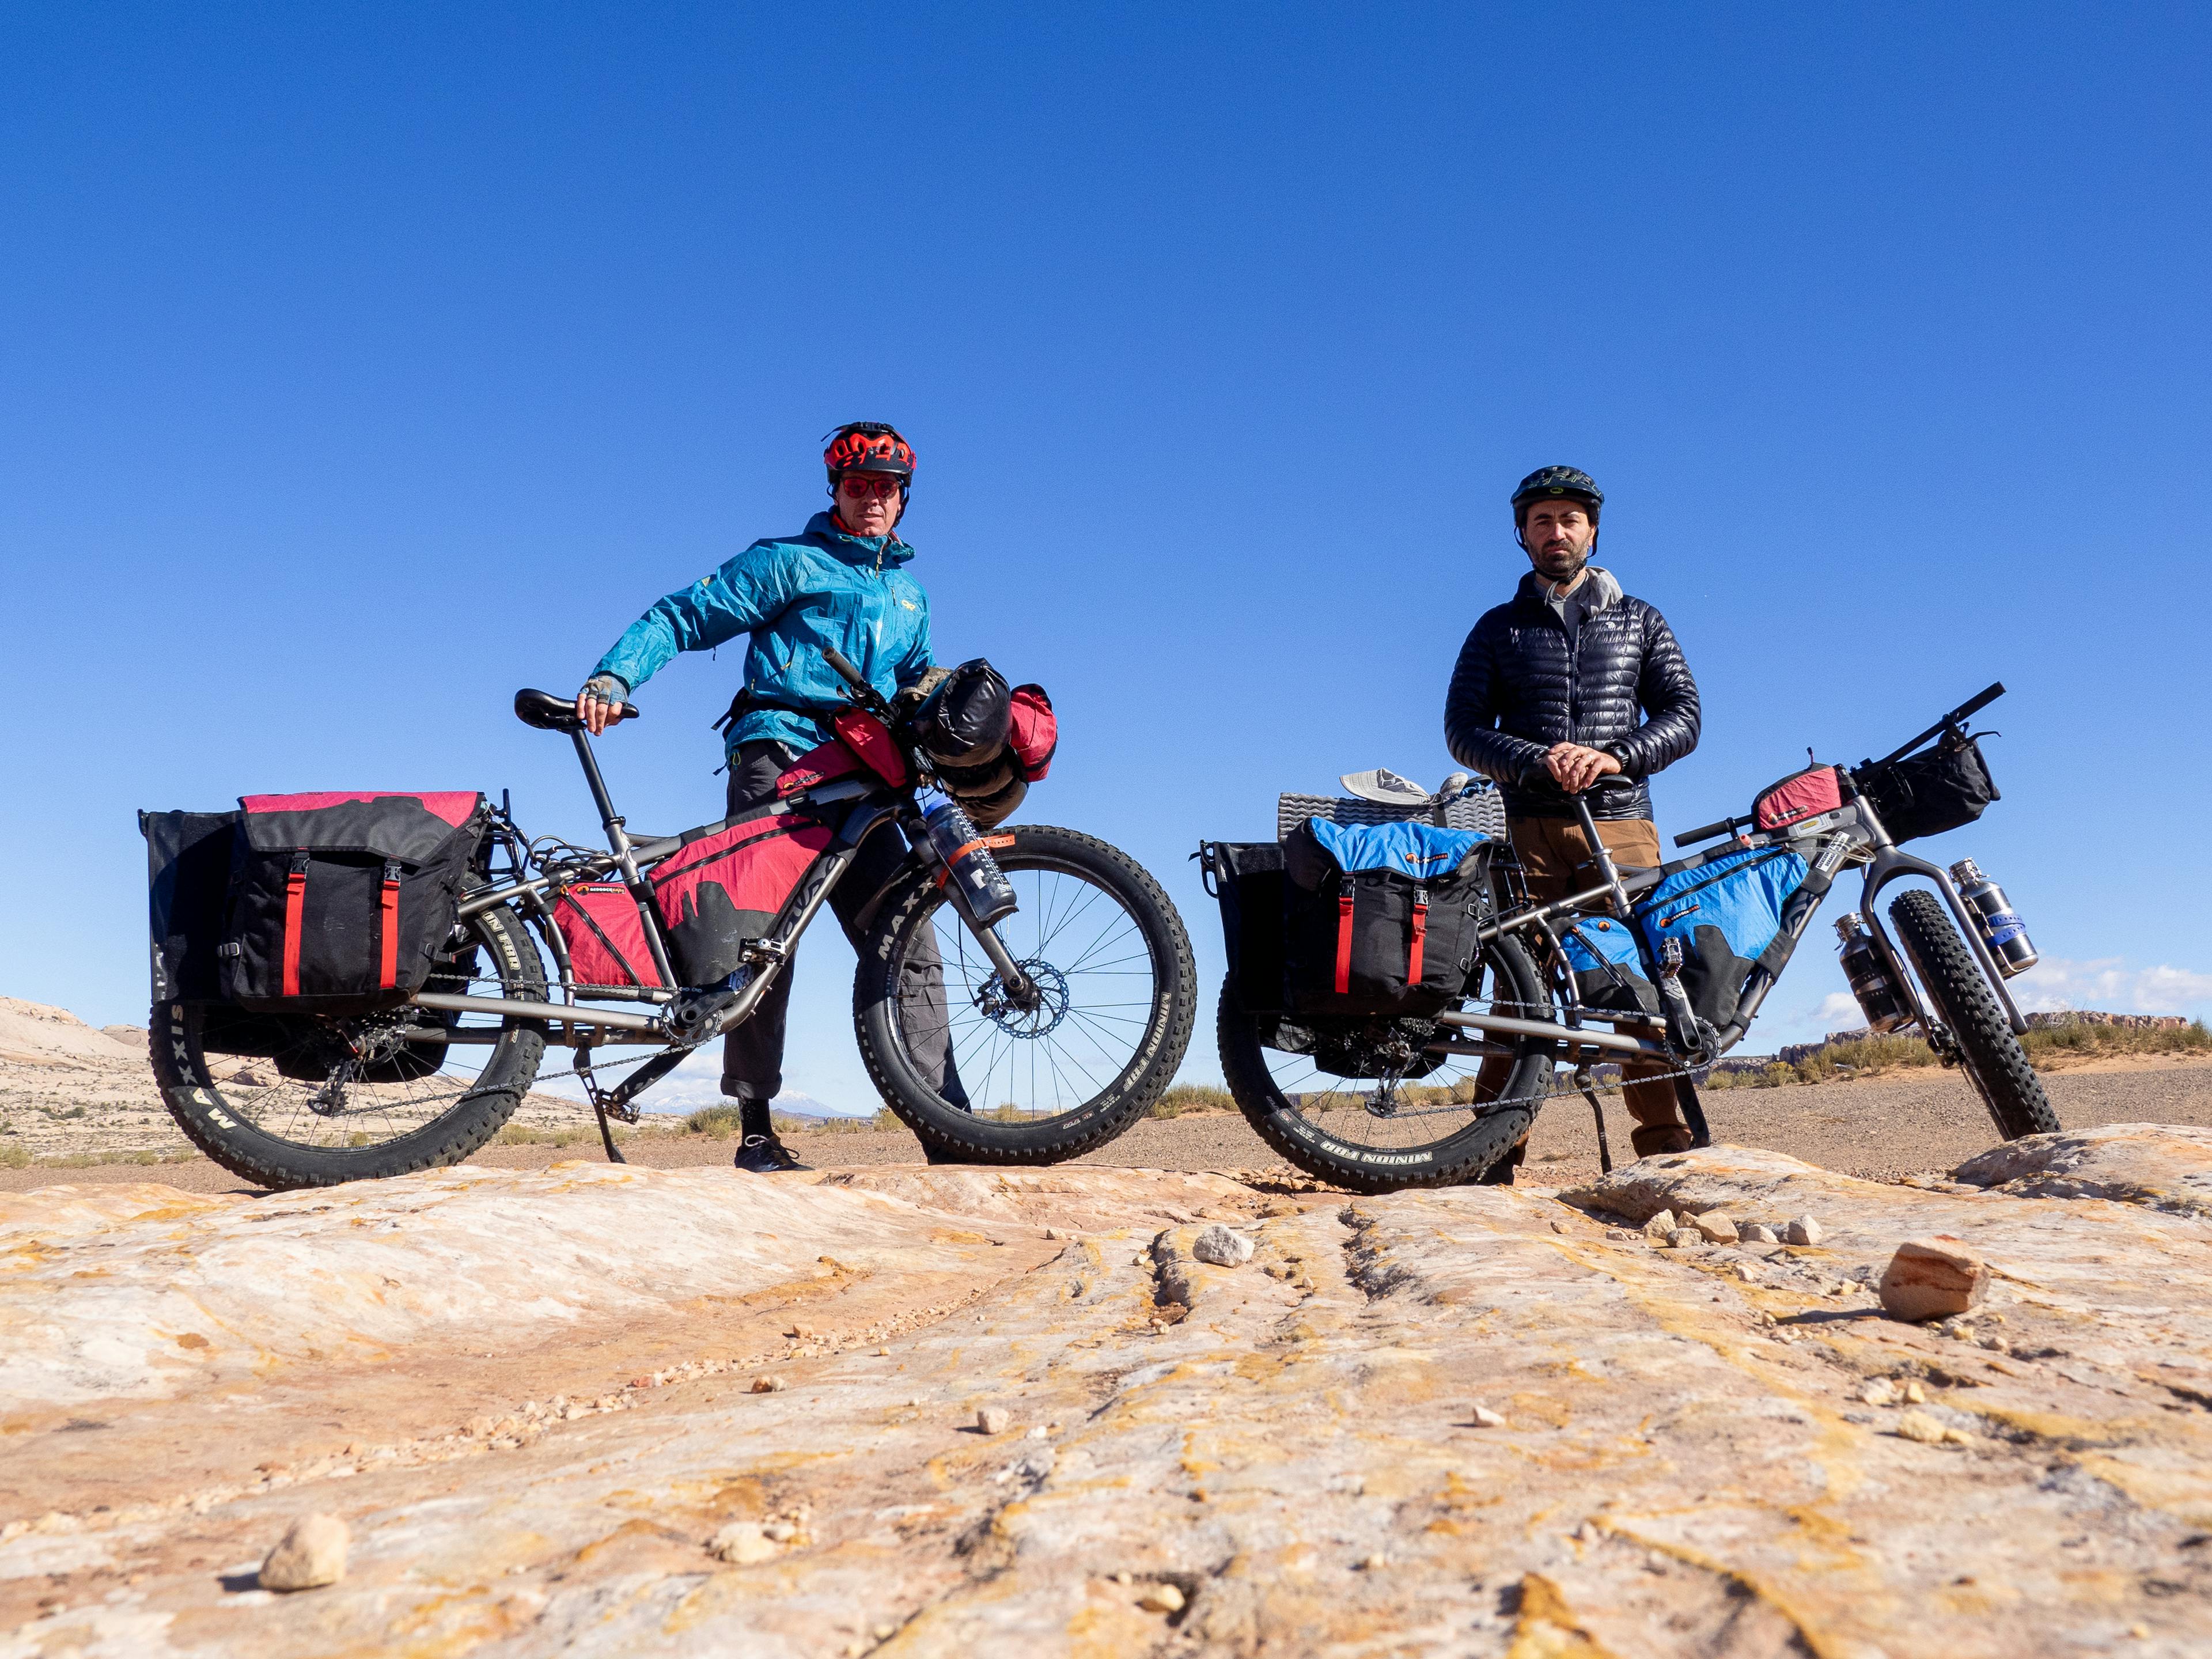 Brett and a friend on the cargo bikepacking road.